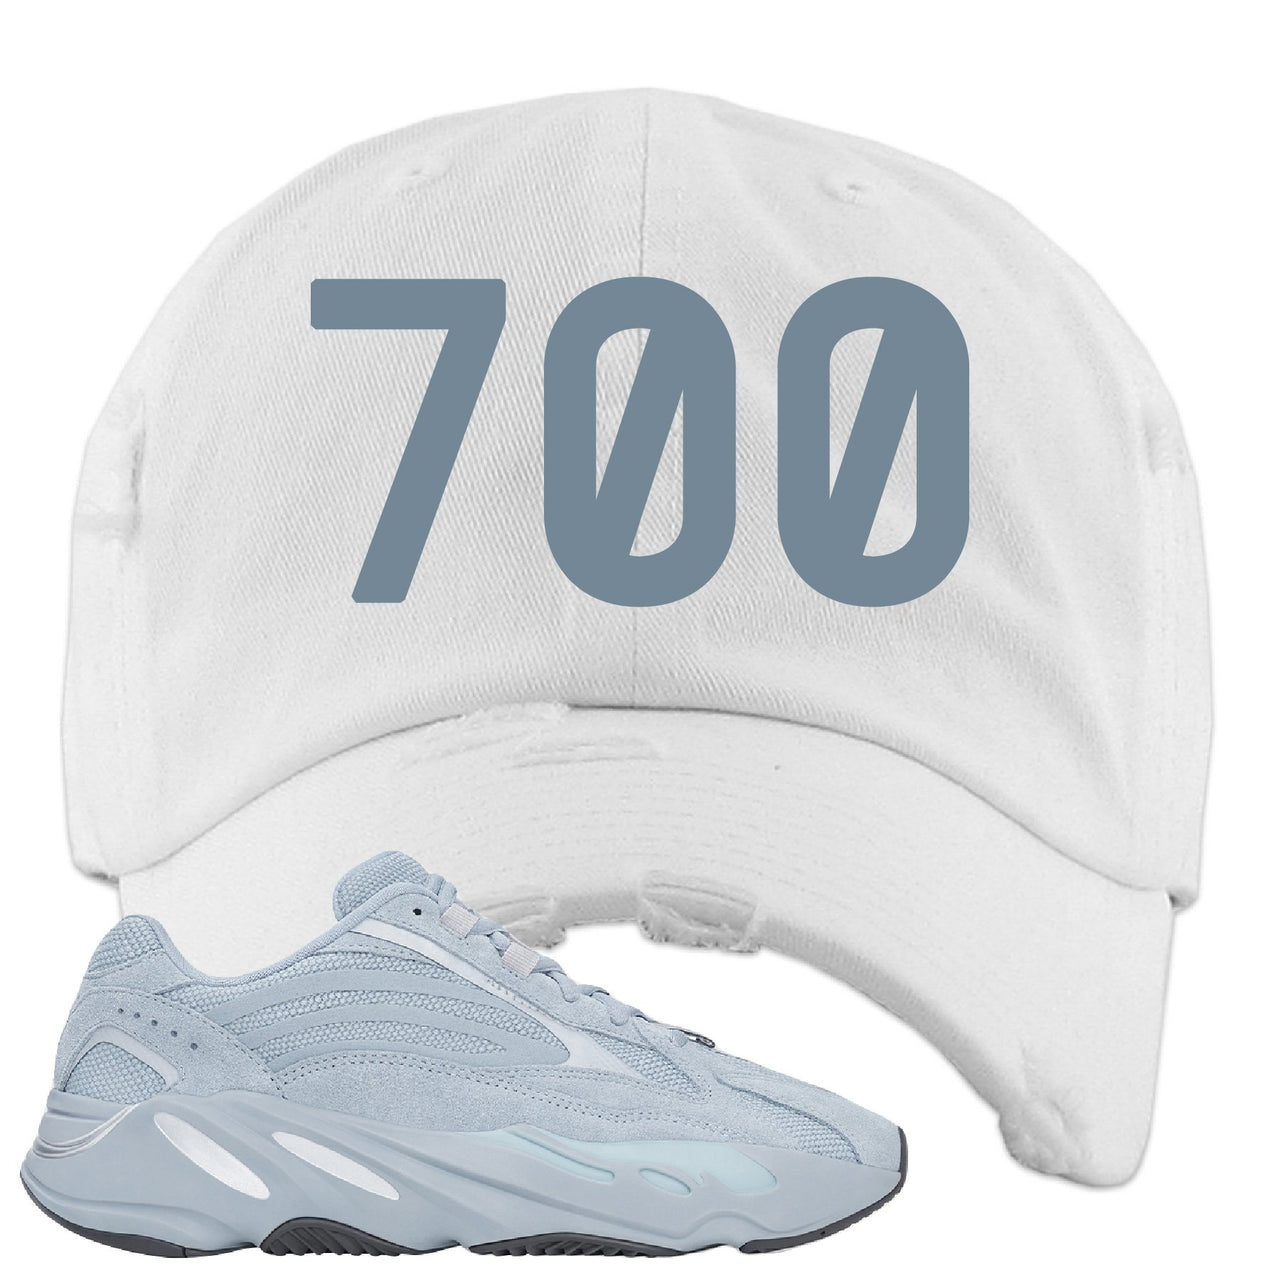 Yeezy Boost 700 V2 Hospital Blue 700 Sneaker Matching White Distressed Dad Hat